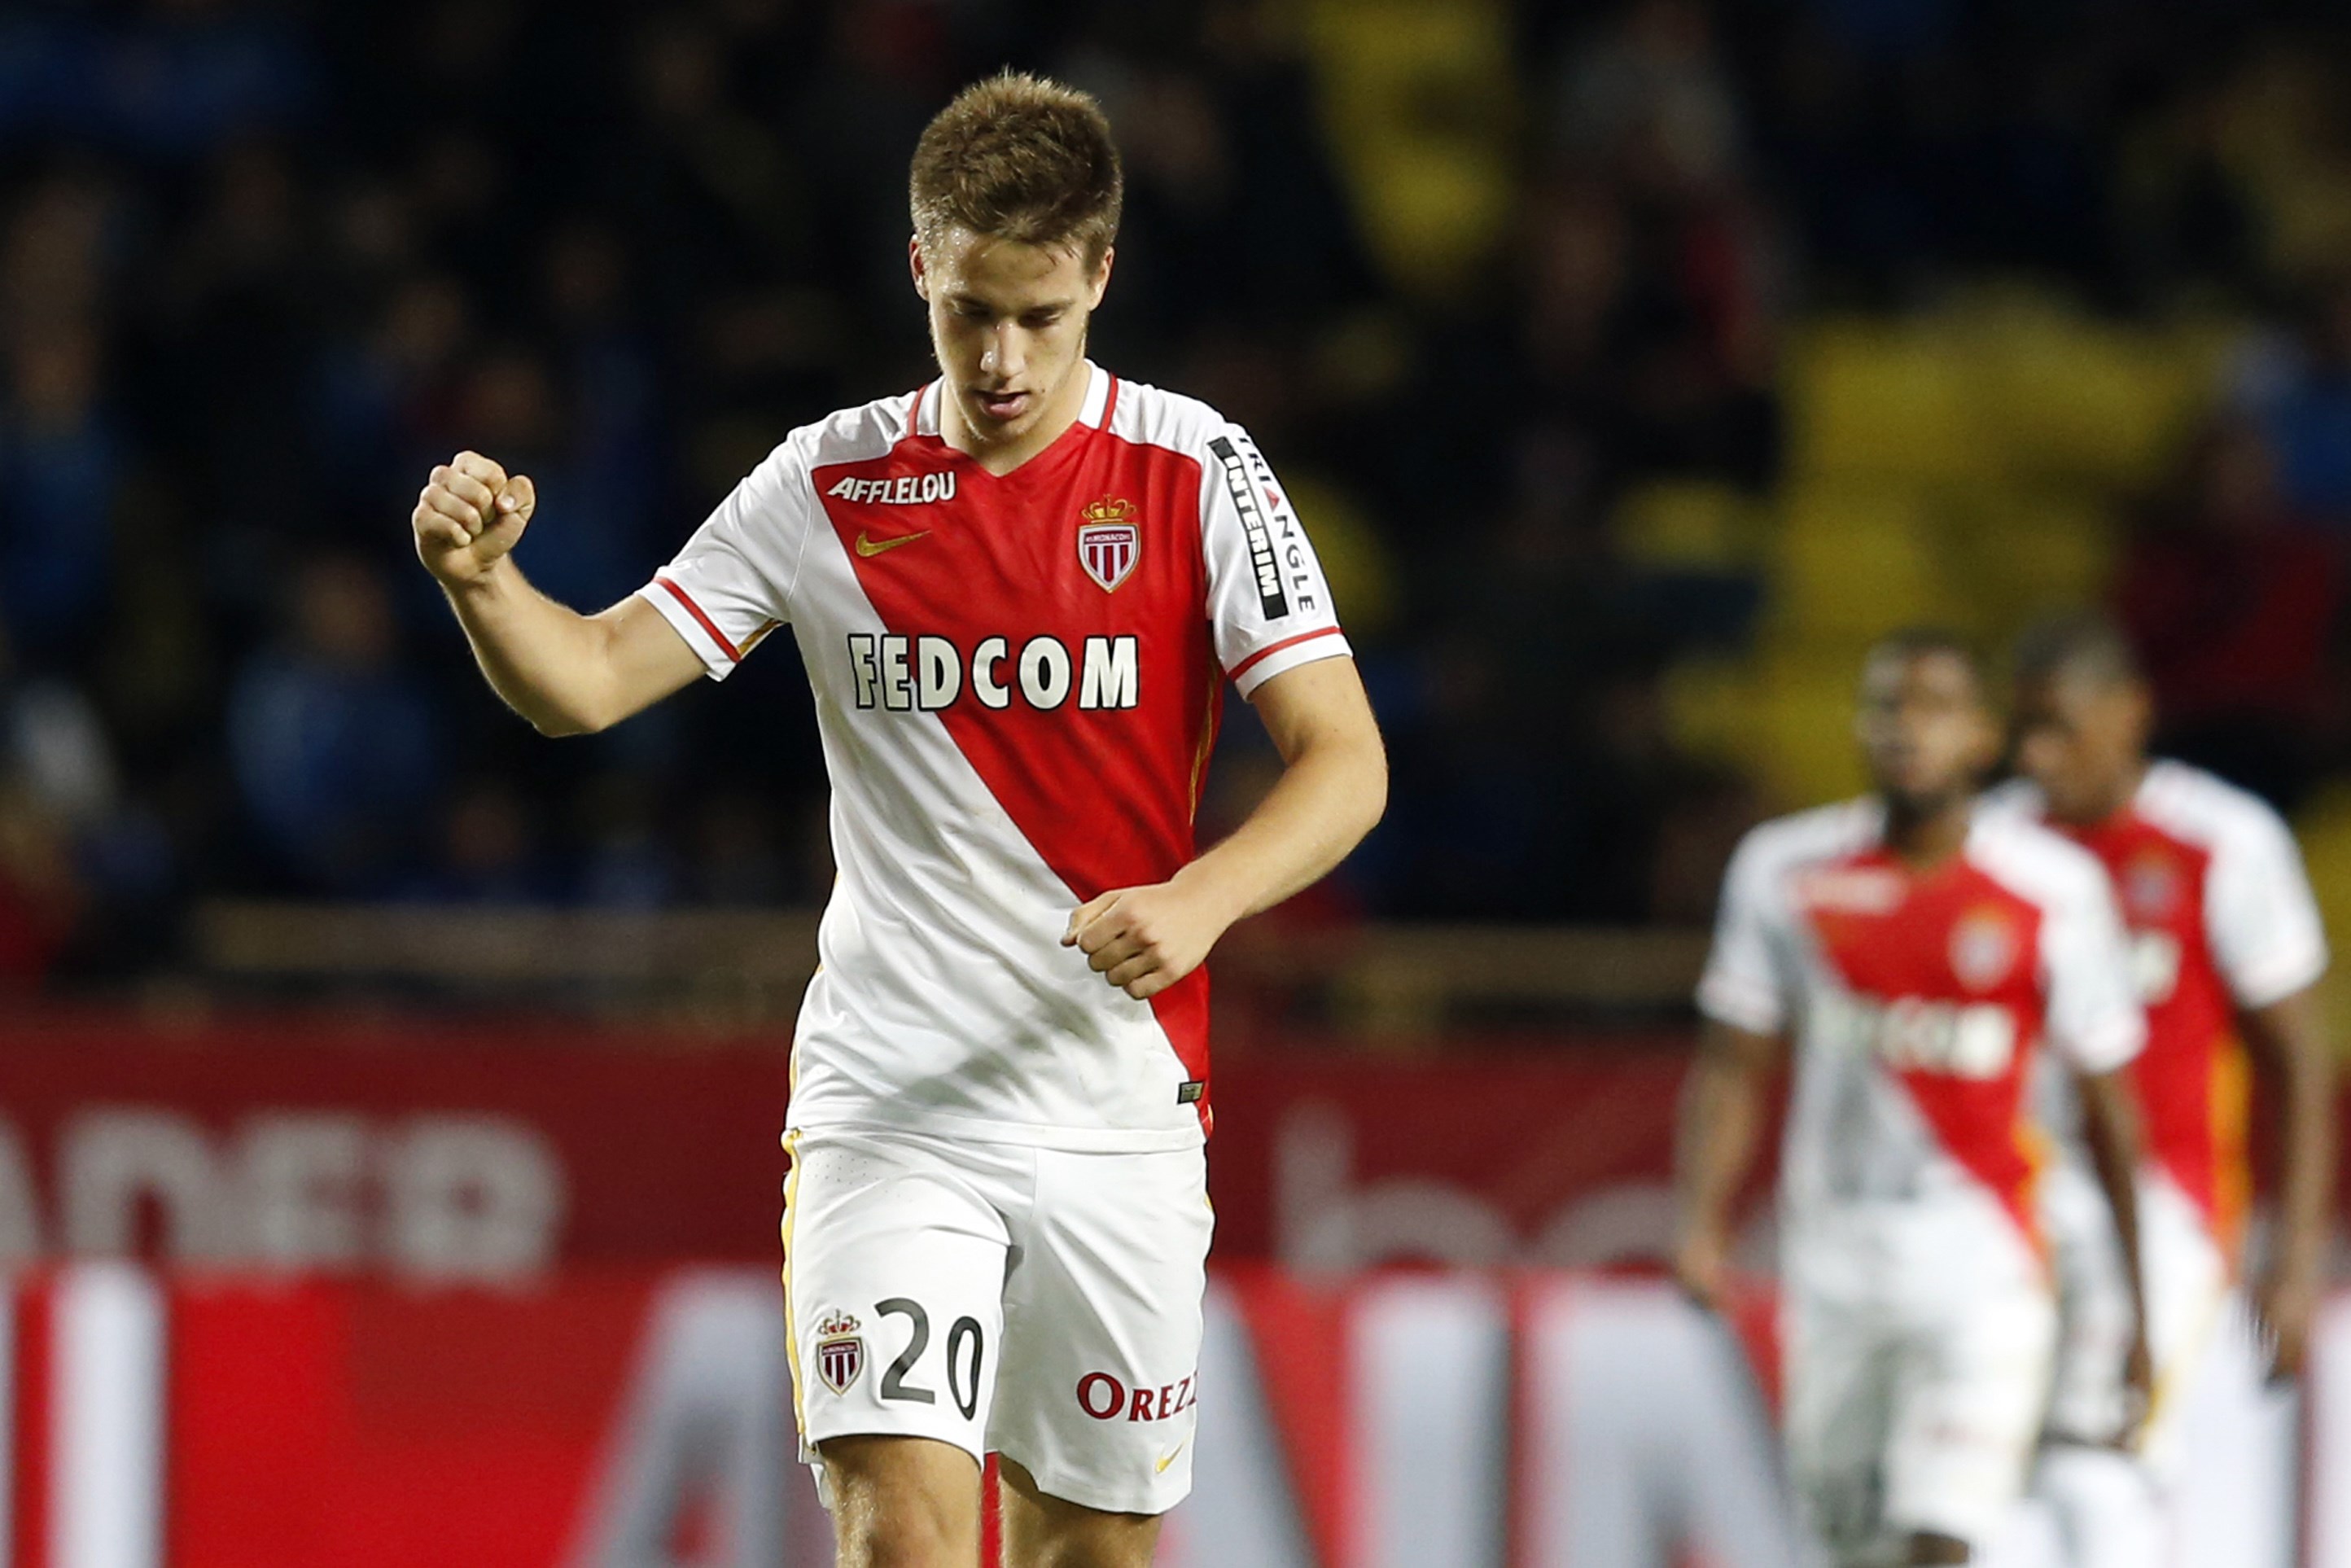 Monaco's Croatian midfielder Mario Pasalic celebrates after scoring a goal during the French L1 football match between Monaco (ASM) and Lyon (OL) on October 16, 2015 at the Louis II Stadium in Monaco.  AFP PHOTO / VALERY HACHE        (Photo credit should read VALERY HACHE/AFP/Getty Images)